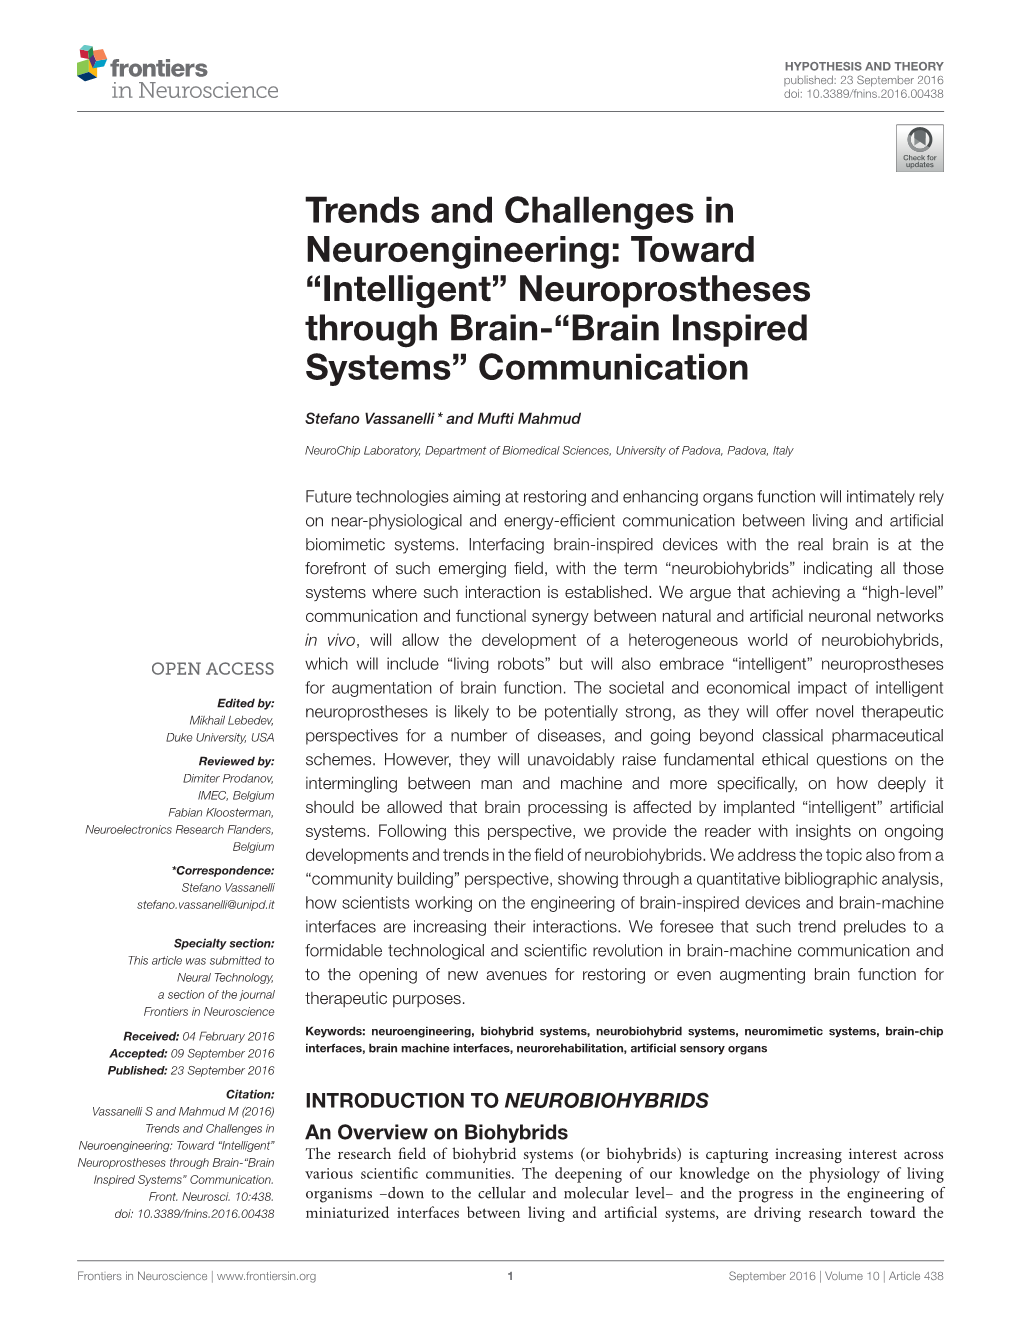 Trends and Challenges in Neuroengineering: Toward “Intelligent” Neuroprostheses Through Brain-“Brain Inspired Systems” Communication